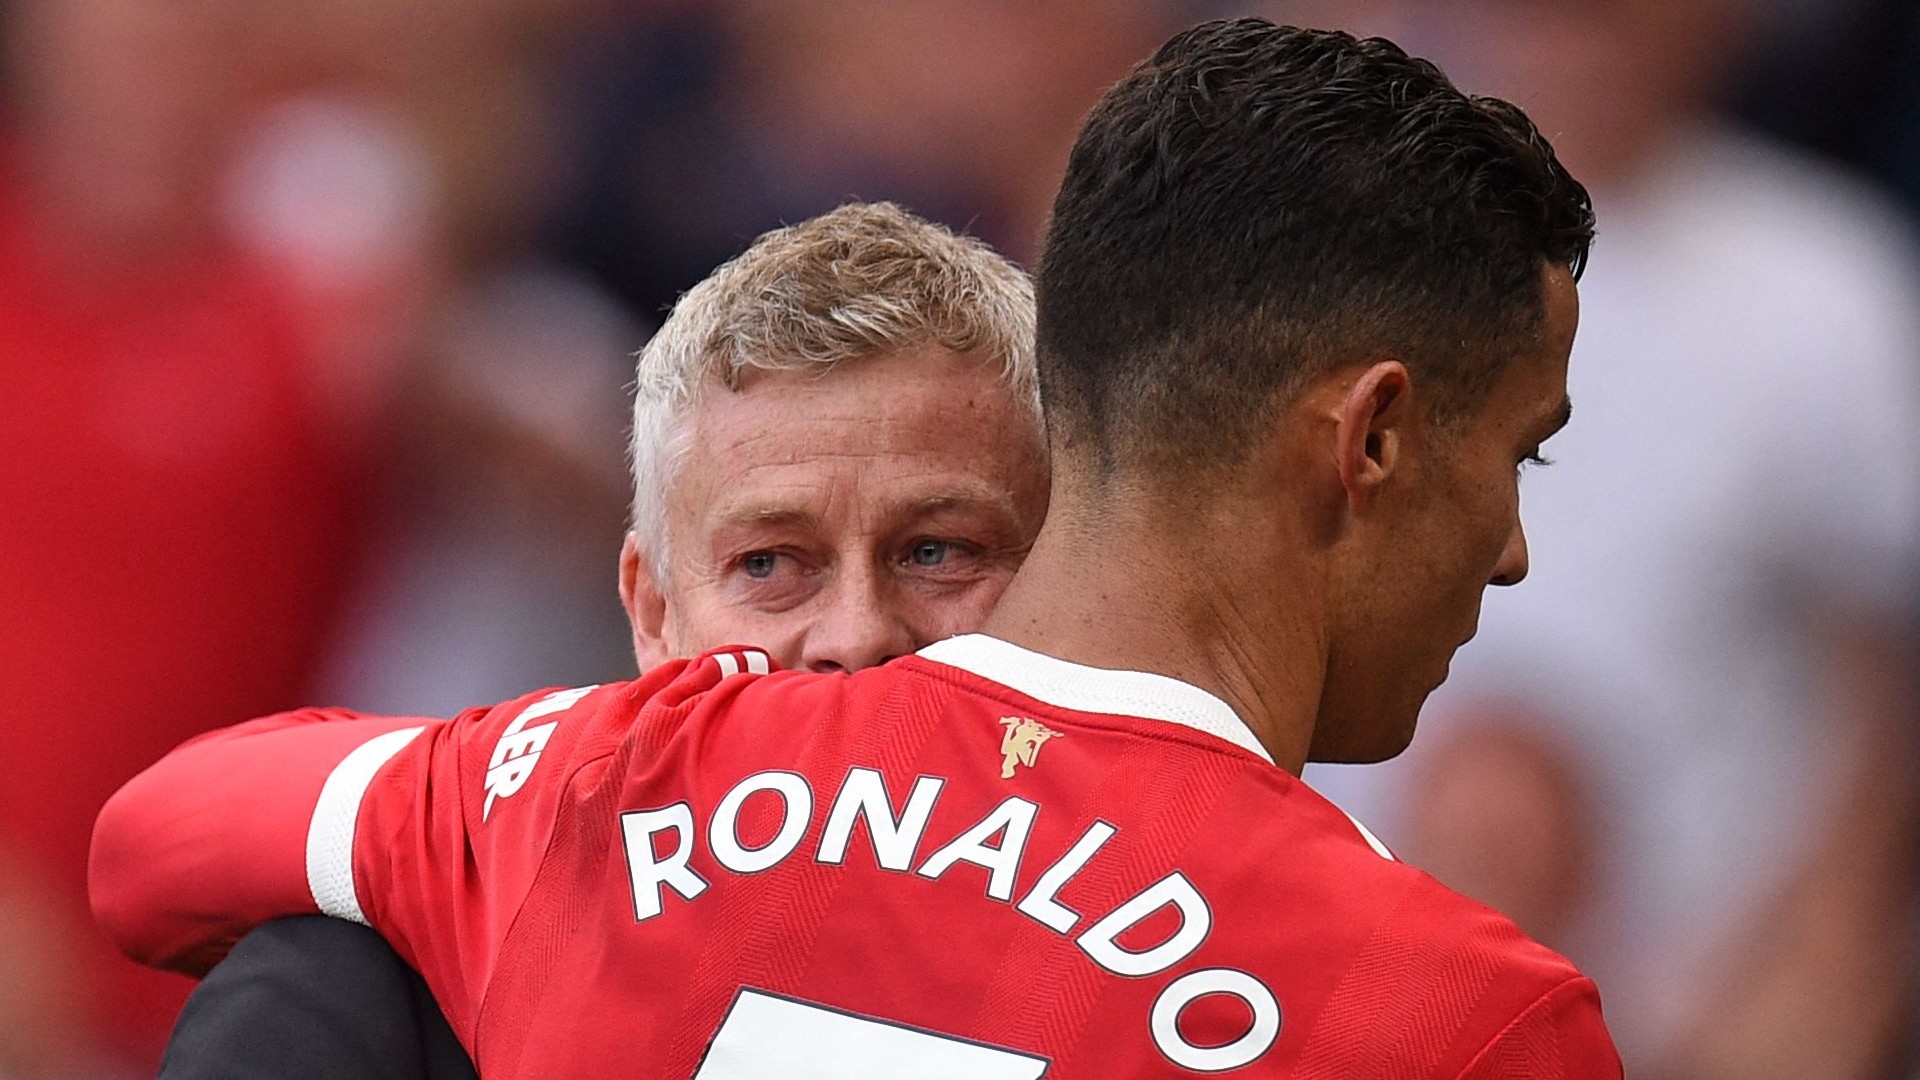 Does Ronaldo arrival put the pressure on Man United?